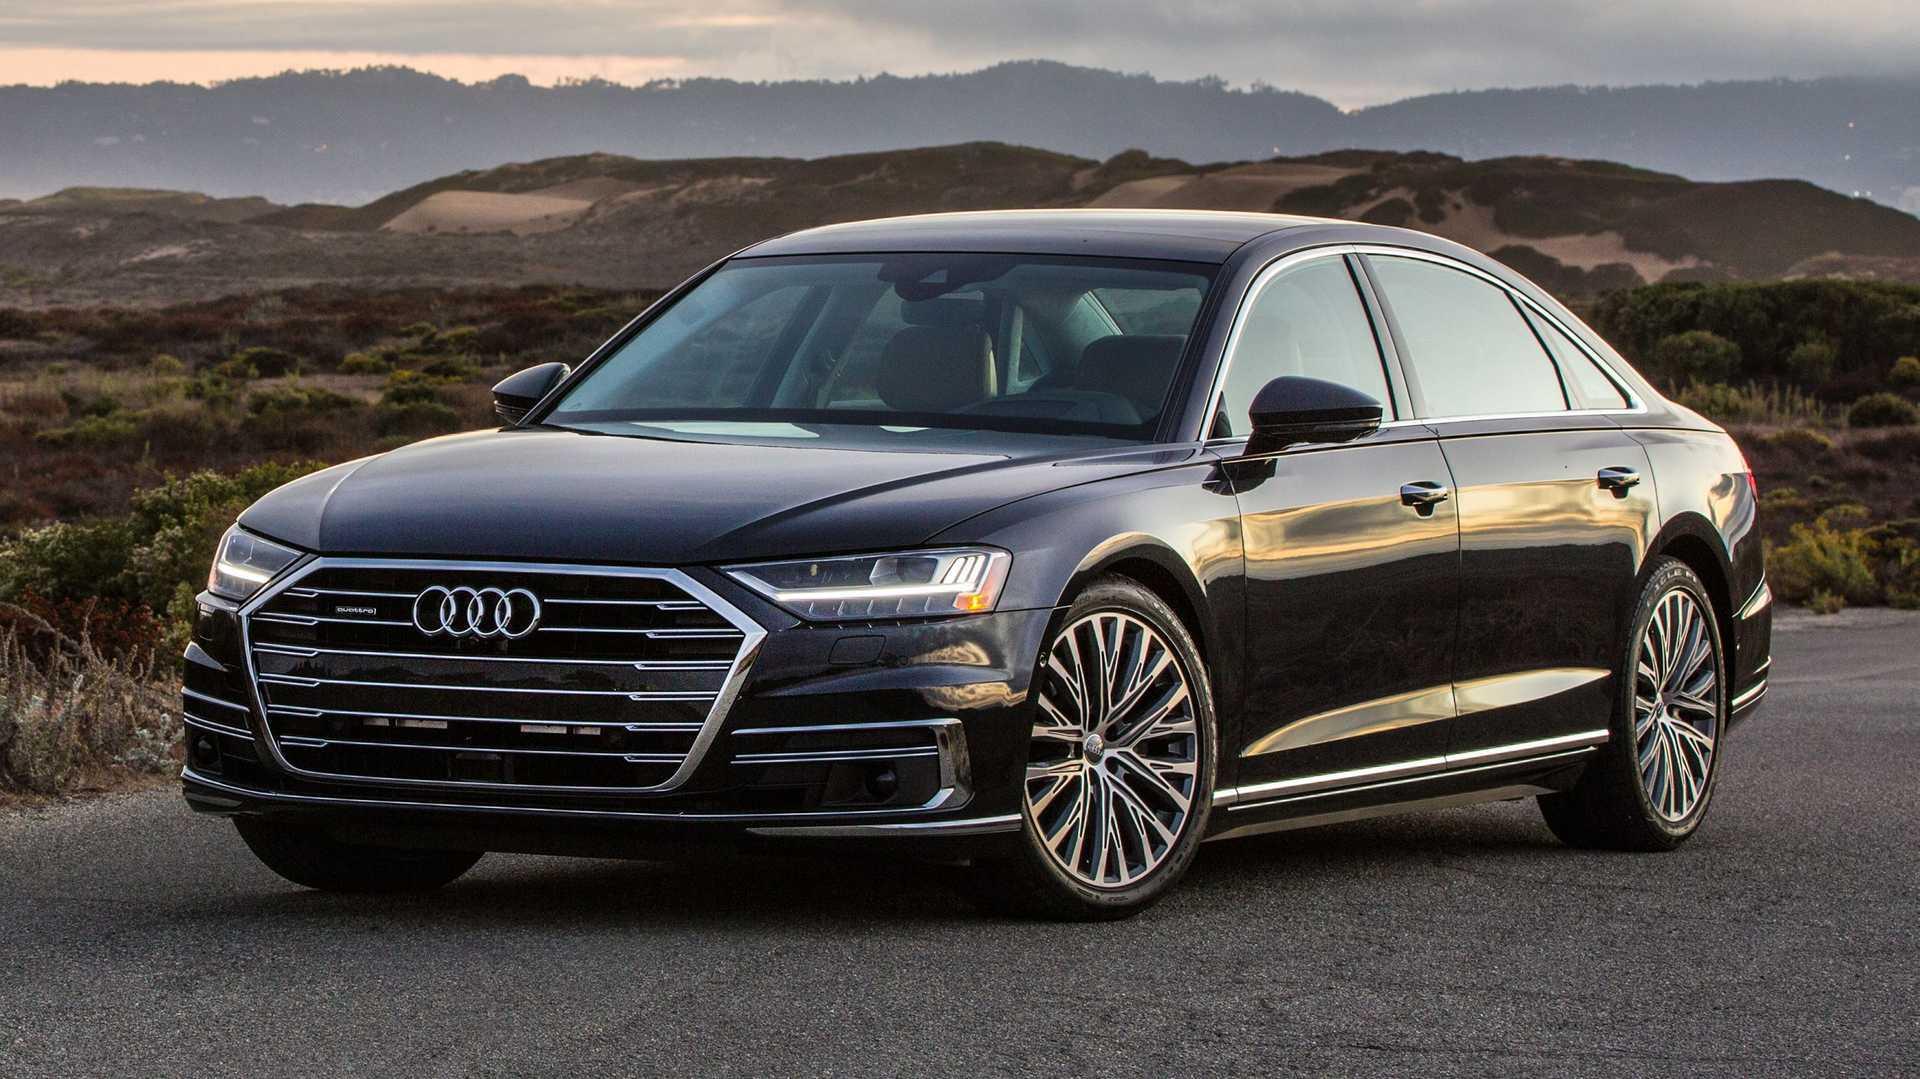 Audi A8 S8 News And Res Motor1